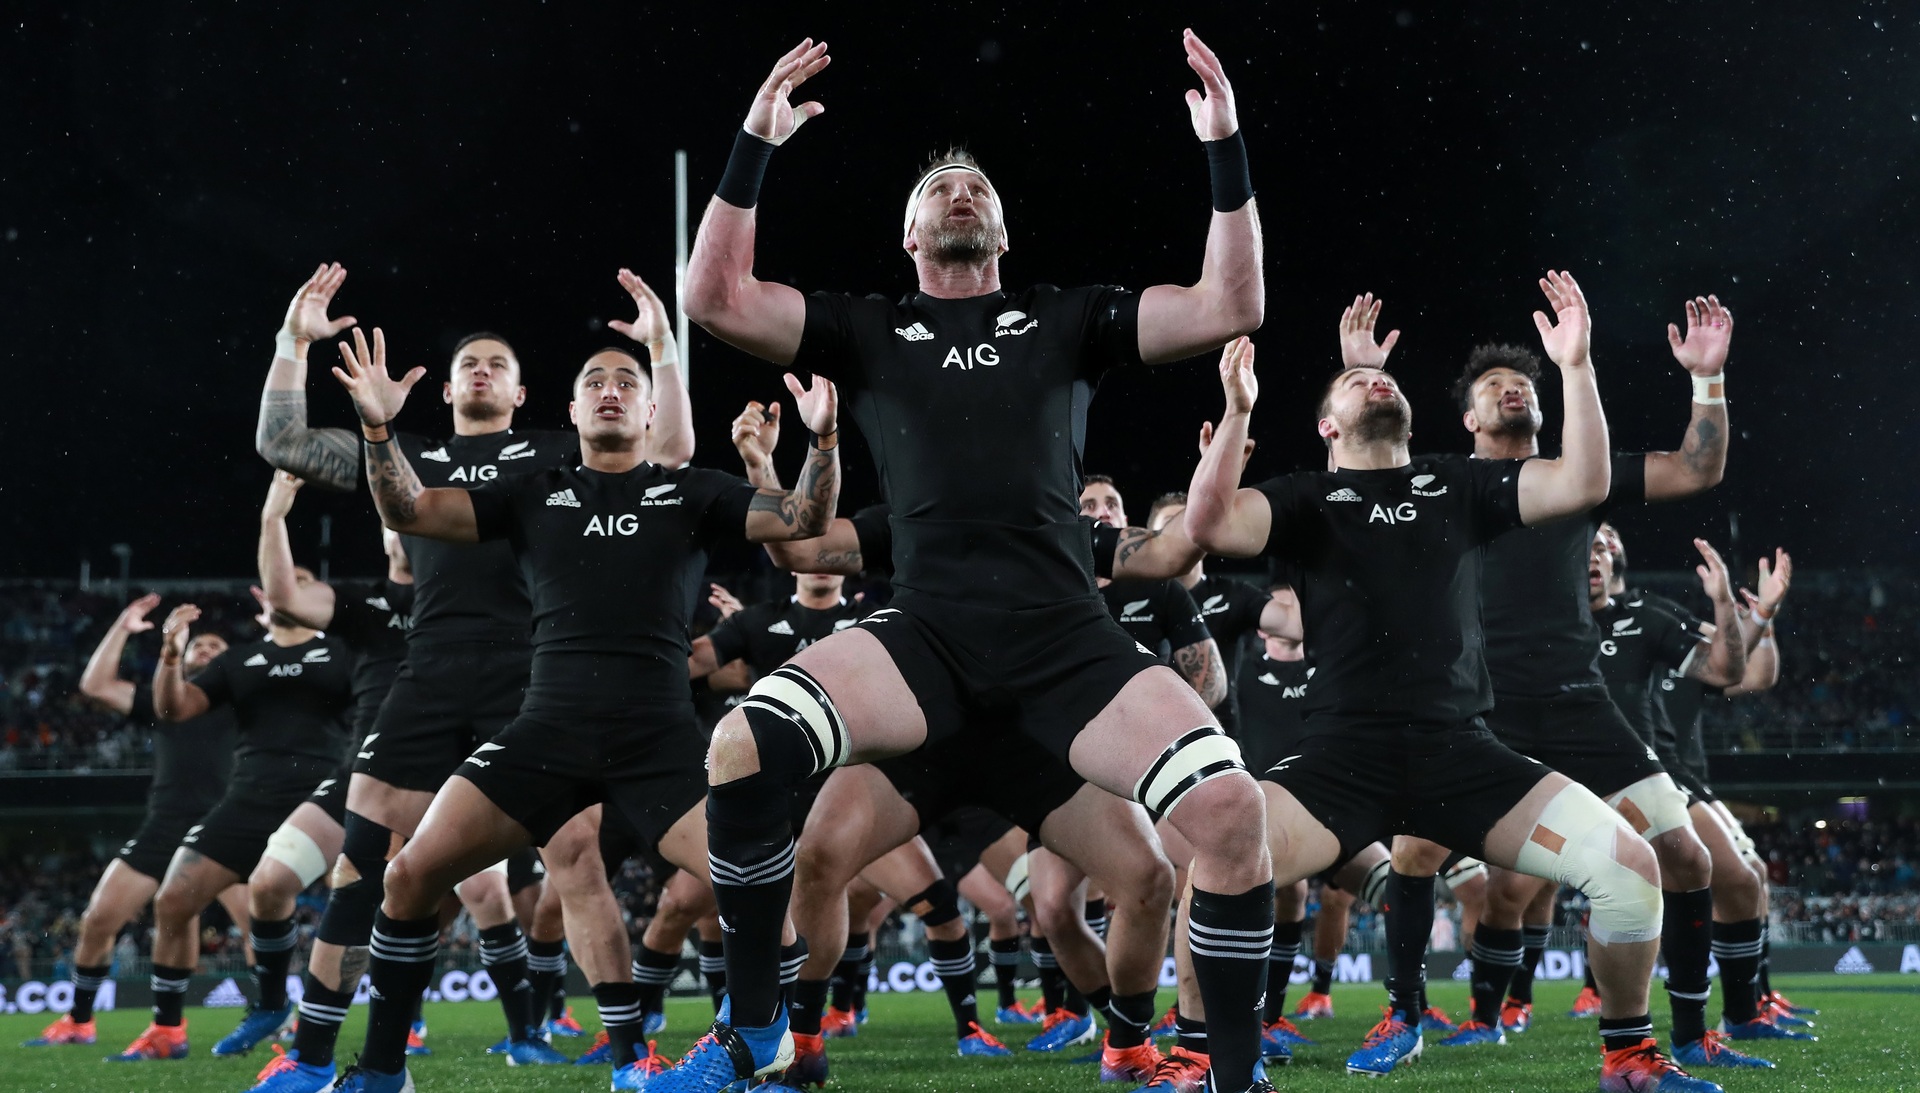 Rugby New Zealand Rugby reveal 2021 All Blacks fixtures